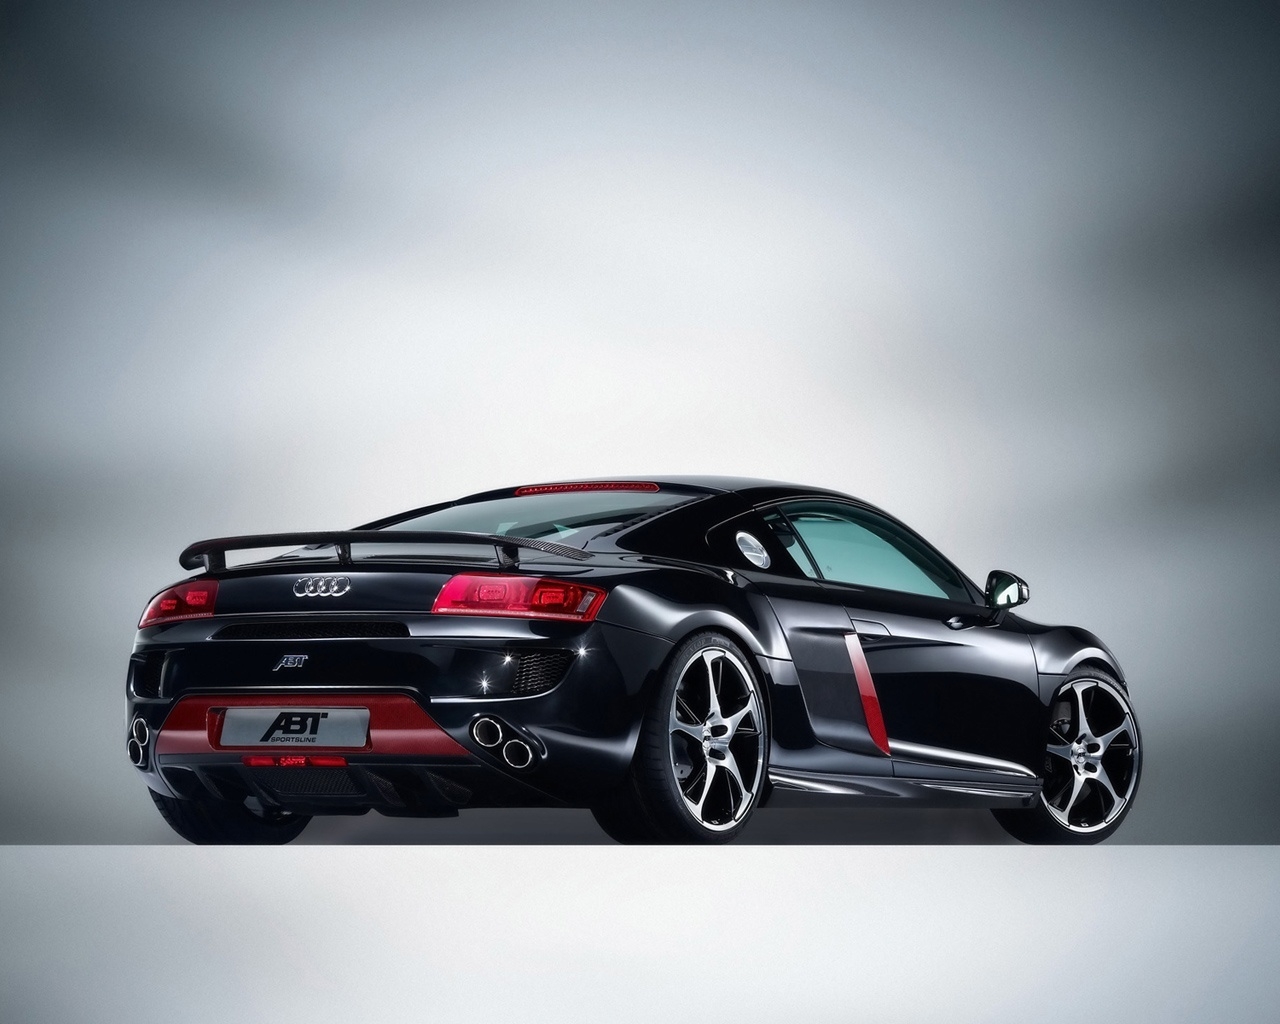 2008 Abt Audi R8 - Rear Angle for 1280 x 1024 resolution